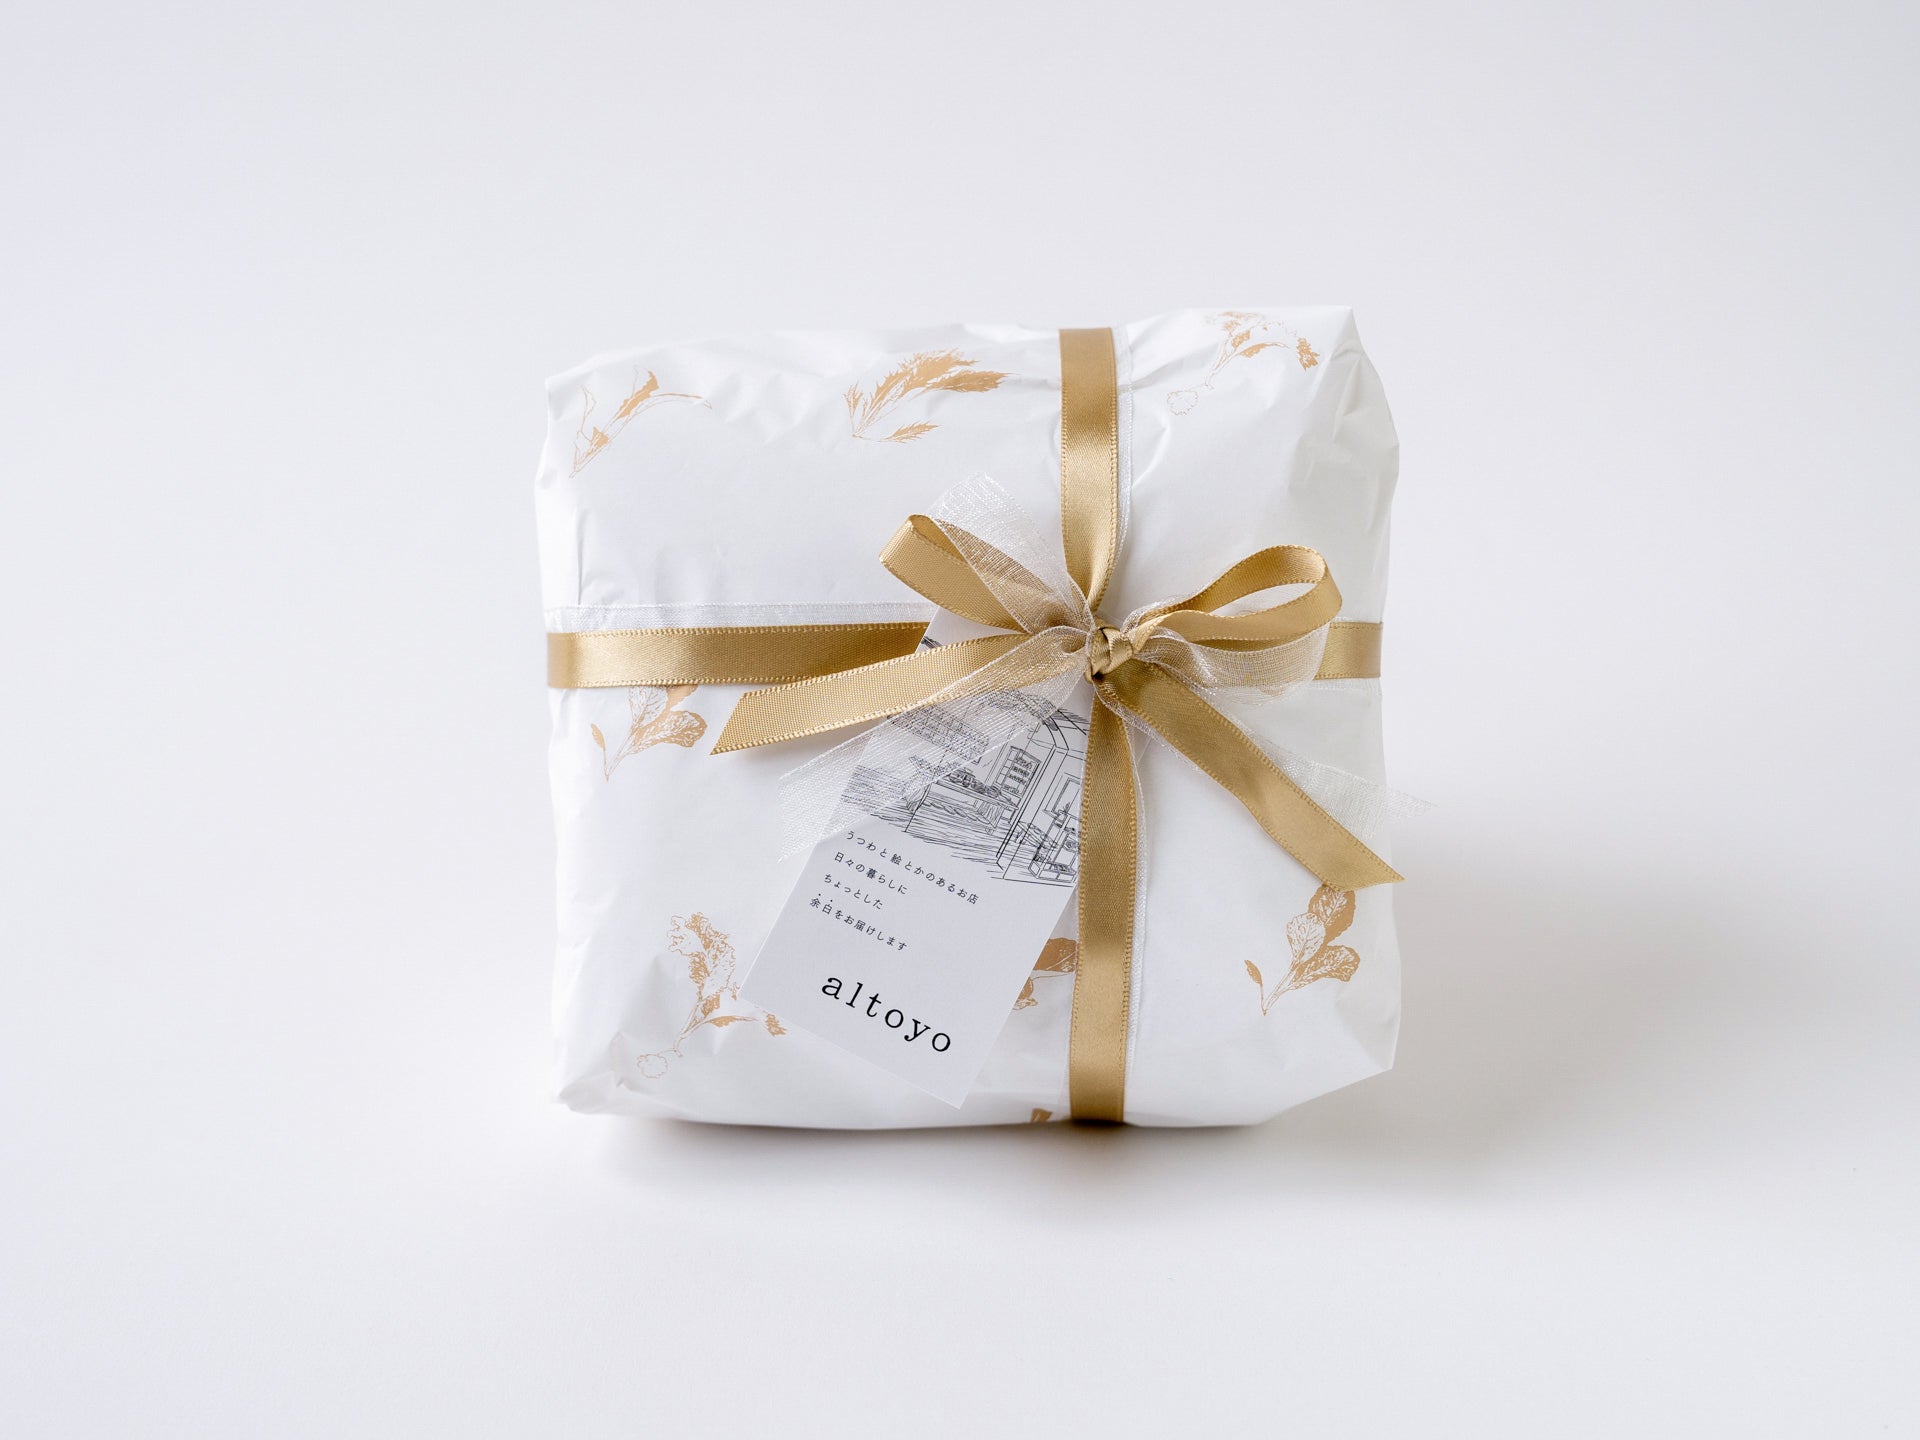 Gift wrapping (if you would like it, please add it to your cart along with the utensils) 